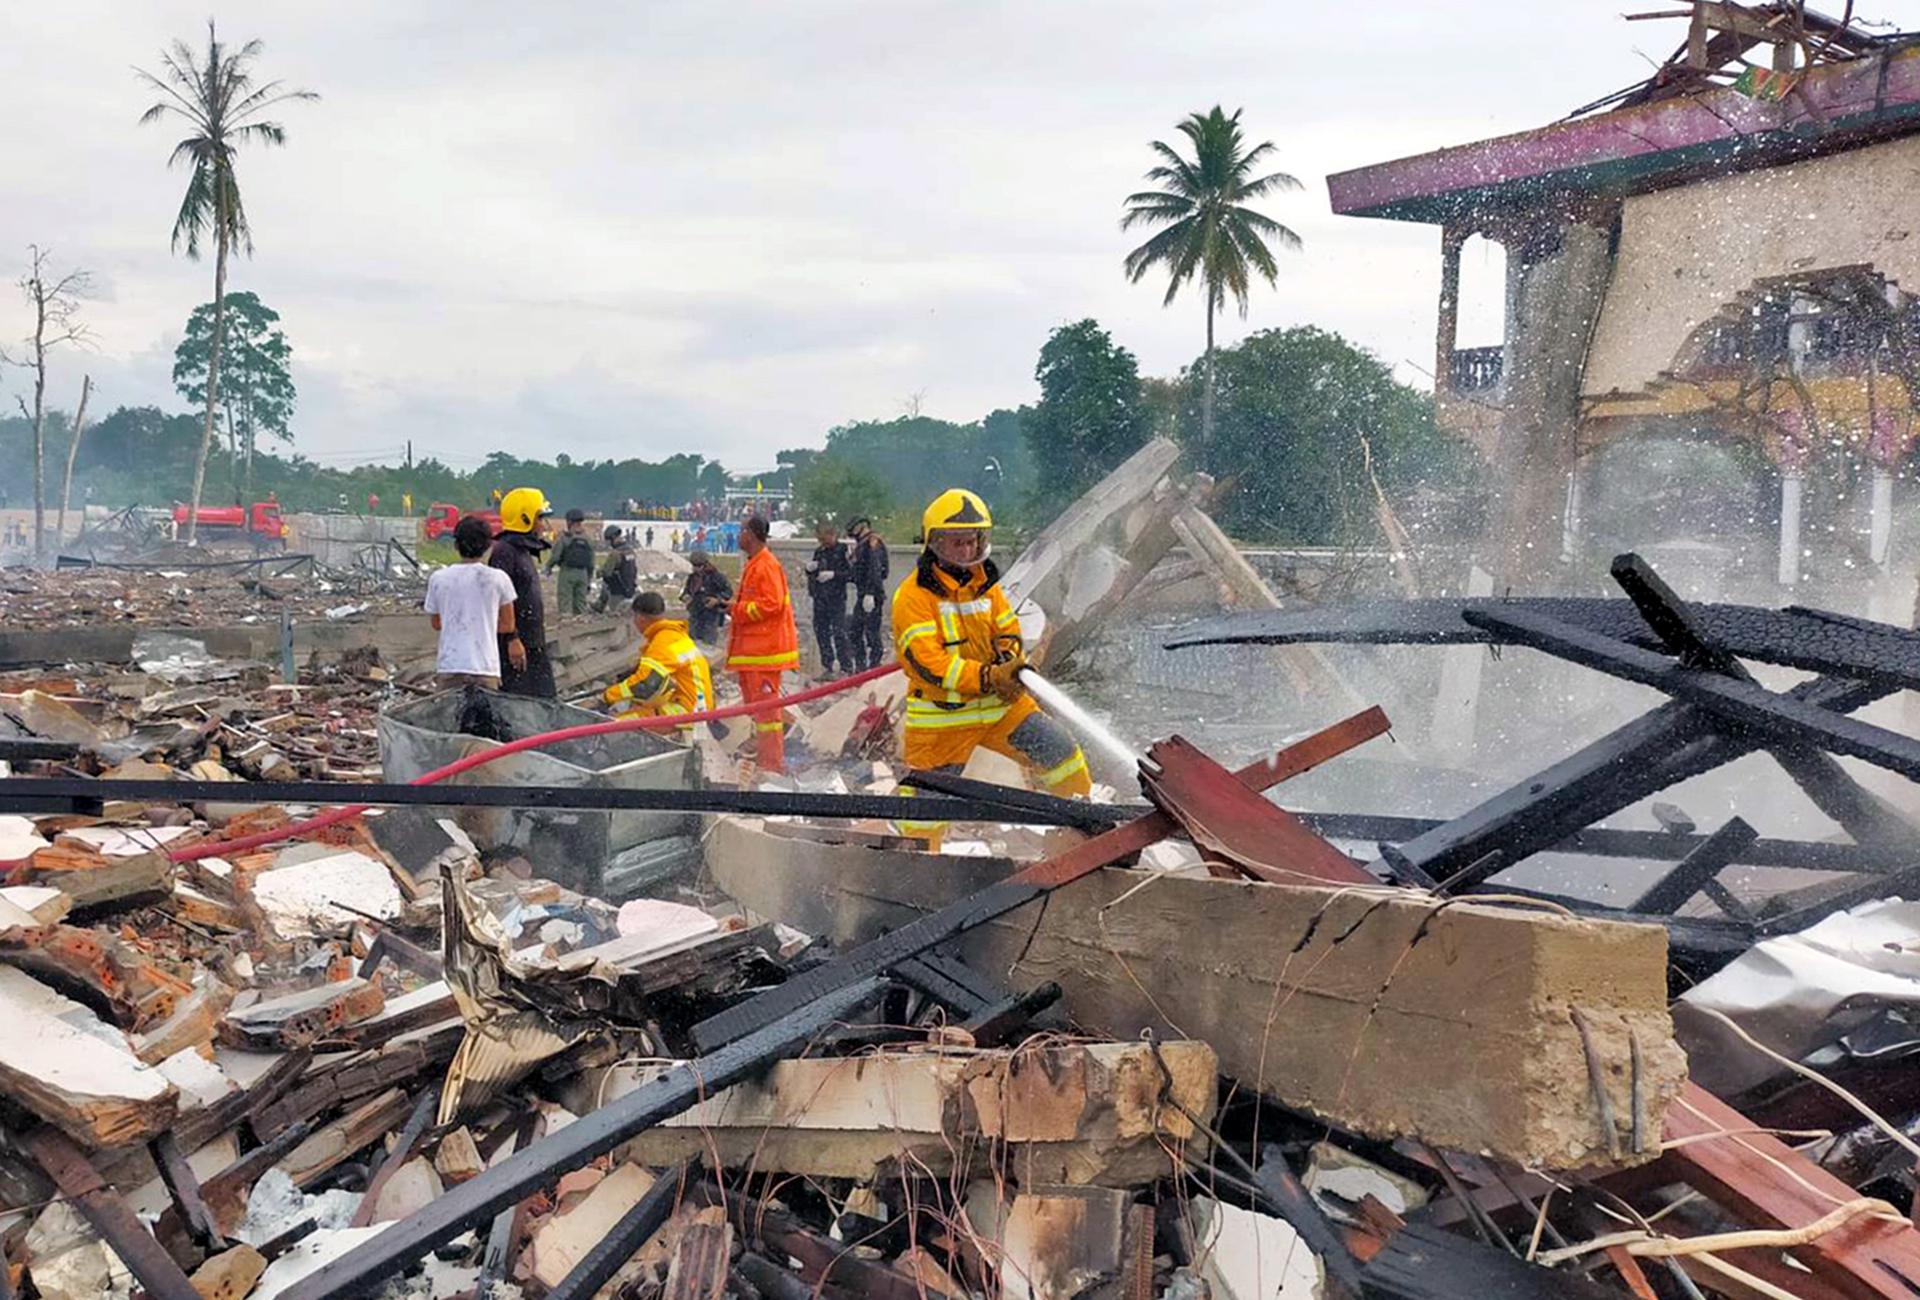 A handout photo made available by Pasemas rescue group shows Thai firefighters extinguishing a fire after an explosion at a firework warehouse in Sungai Kolok district, Narathiwat province, southern Thailand, 29 July 2023. EFE/EPA/PASEMAS RESCUE GROUP HANDOUT HANDOUT EDITORIAL USE ONLY/NO SALES
